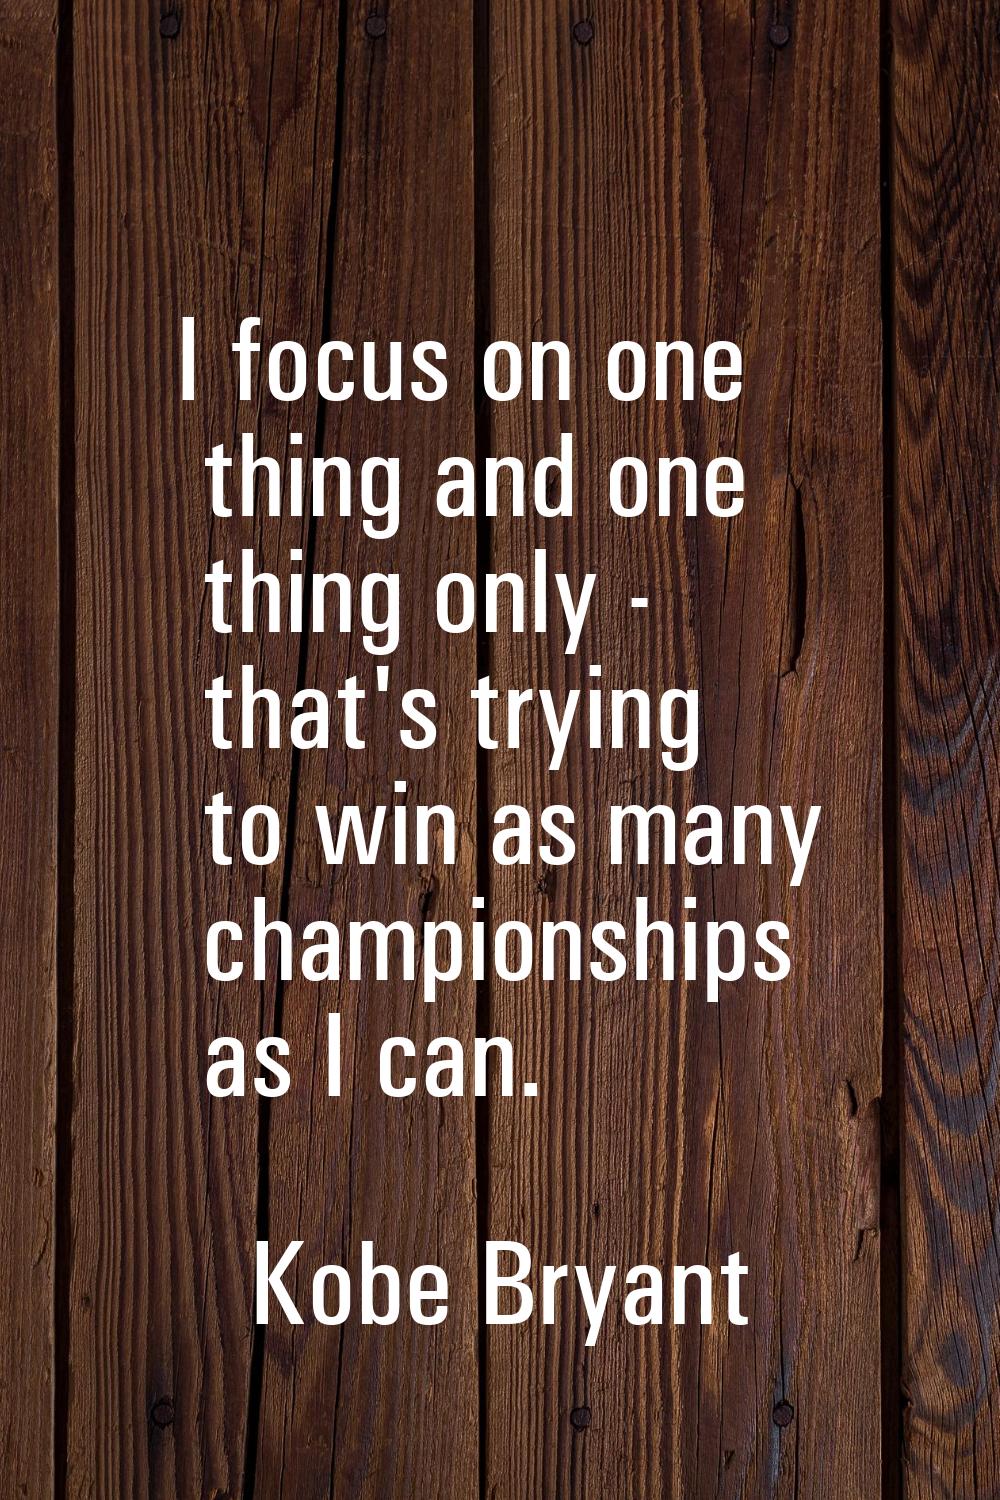 I focus on one thing and one thing only - that's trying to win as many championships as I can.